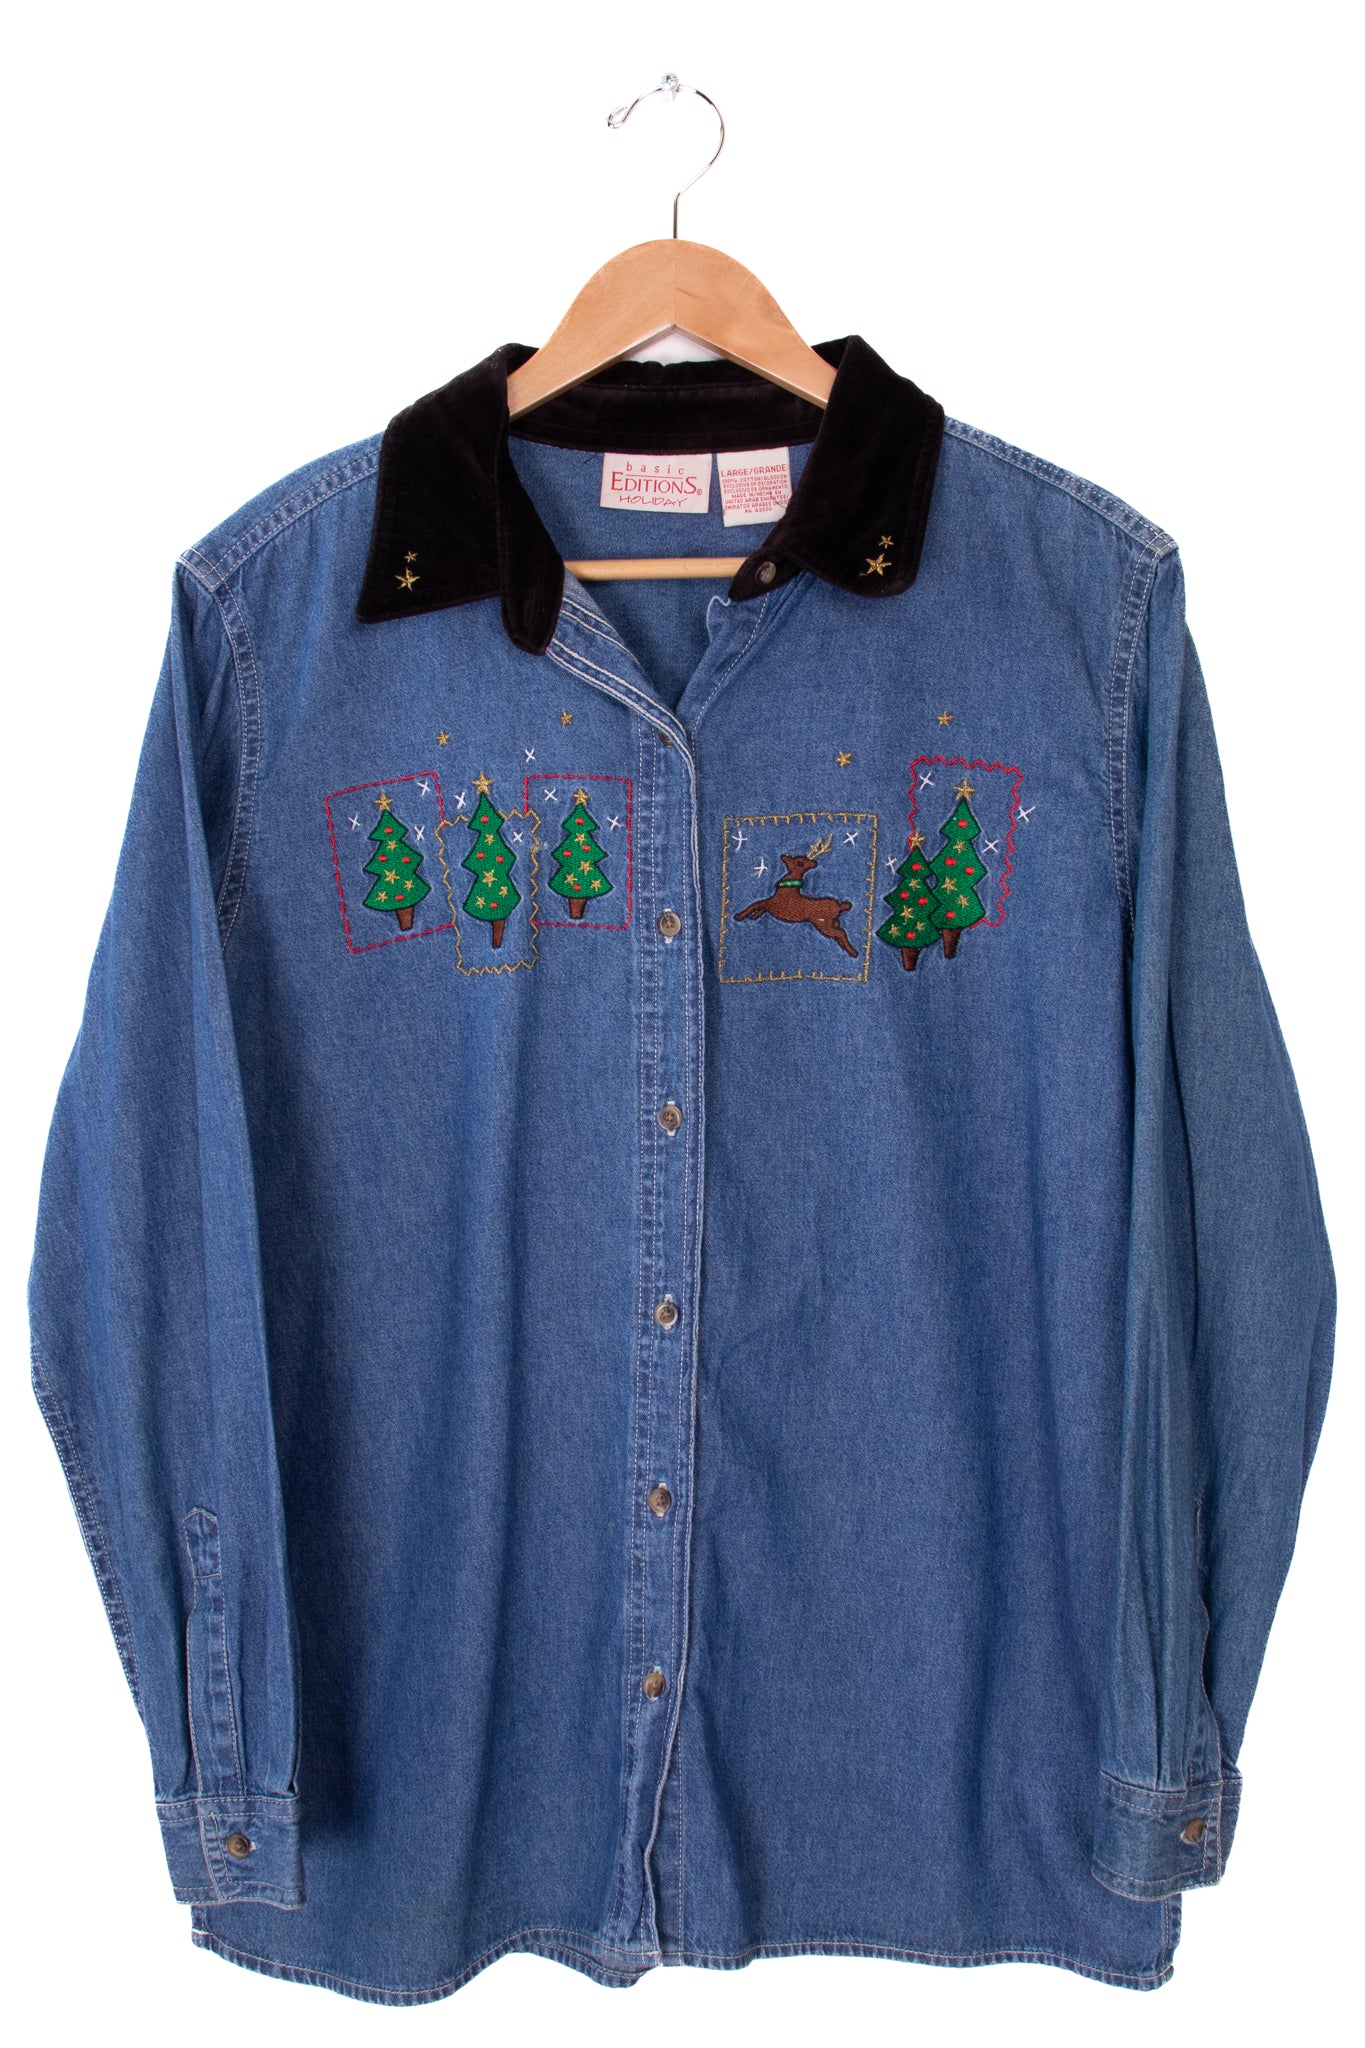 Basic Editions Holiday Denim Button Up